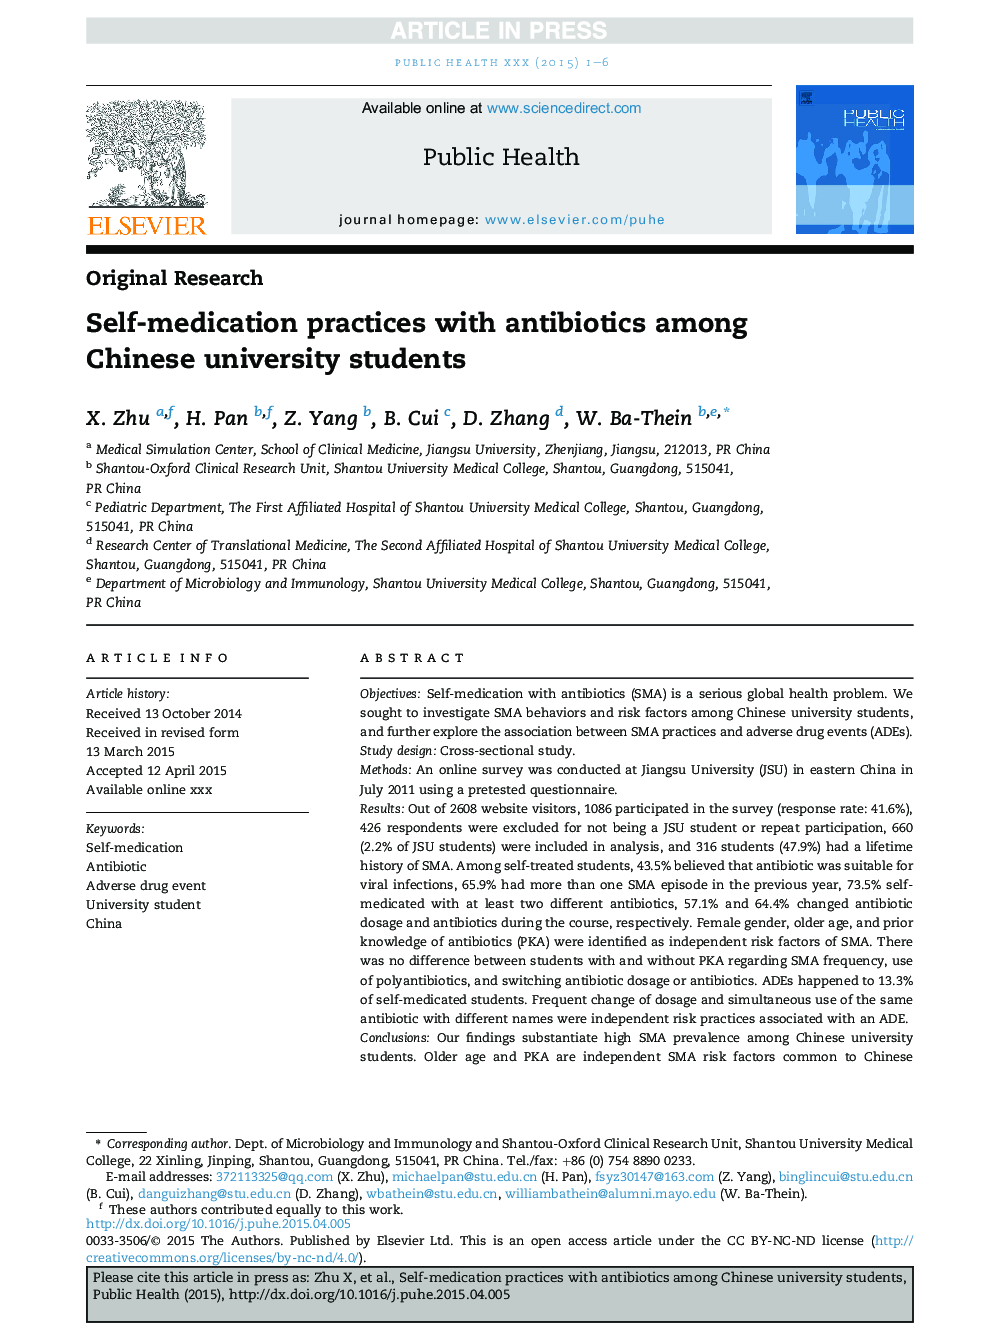 Self-medication practices with antibiotics among Chinese university students